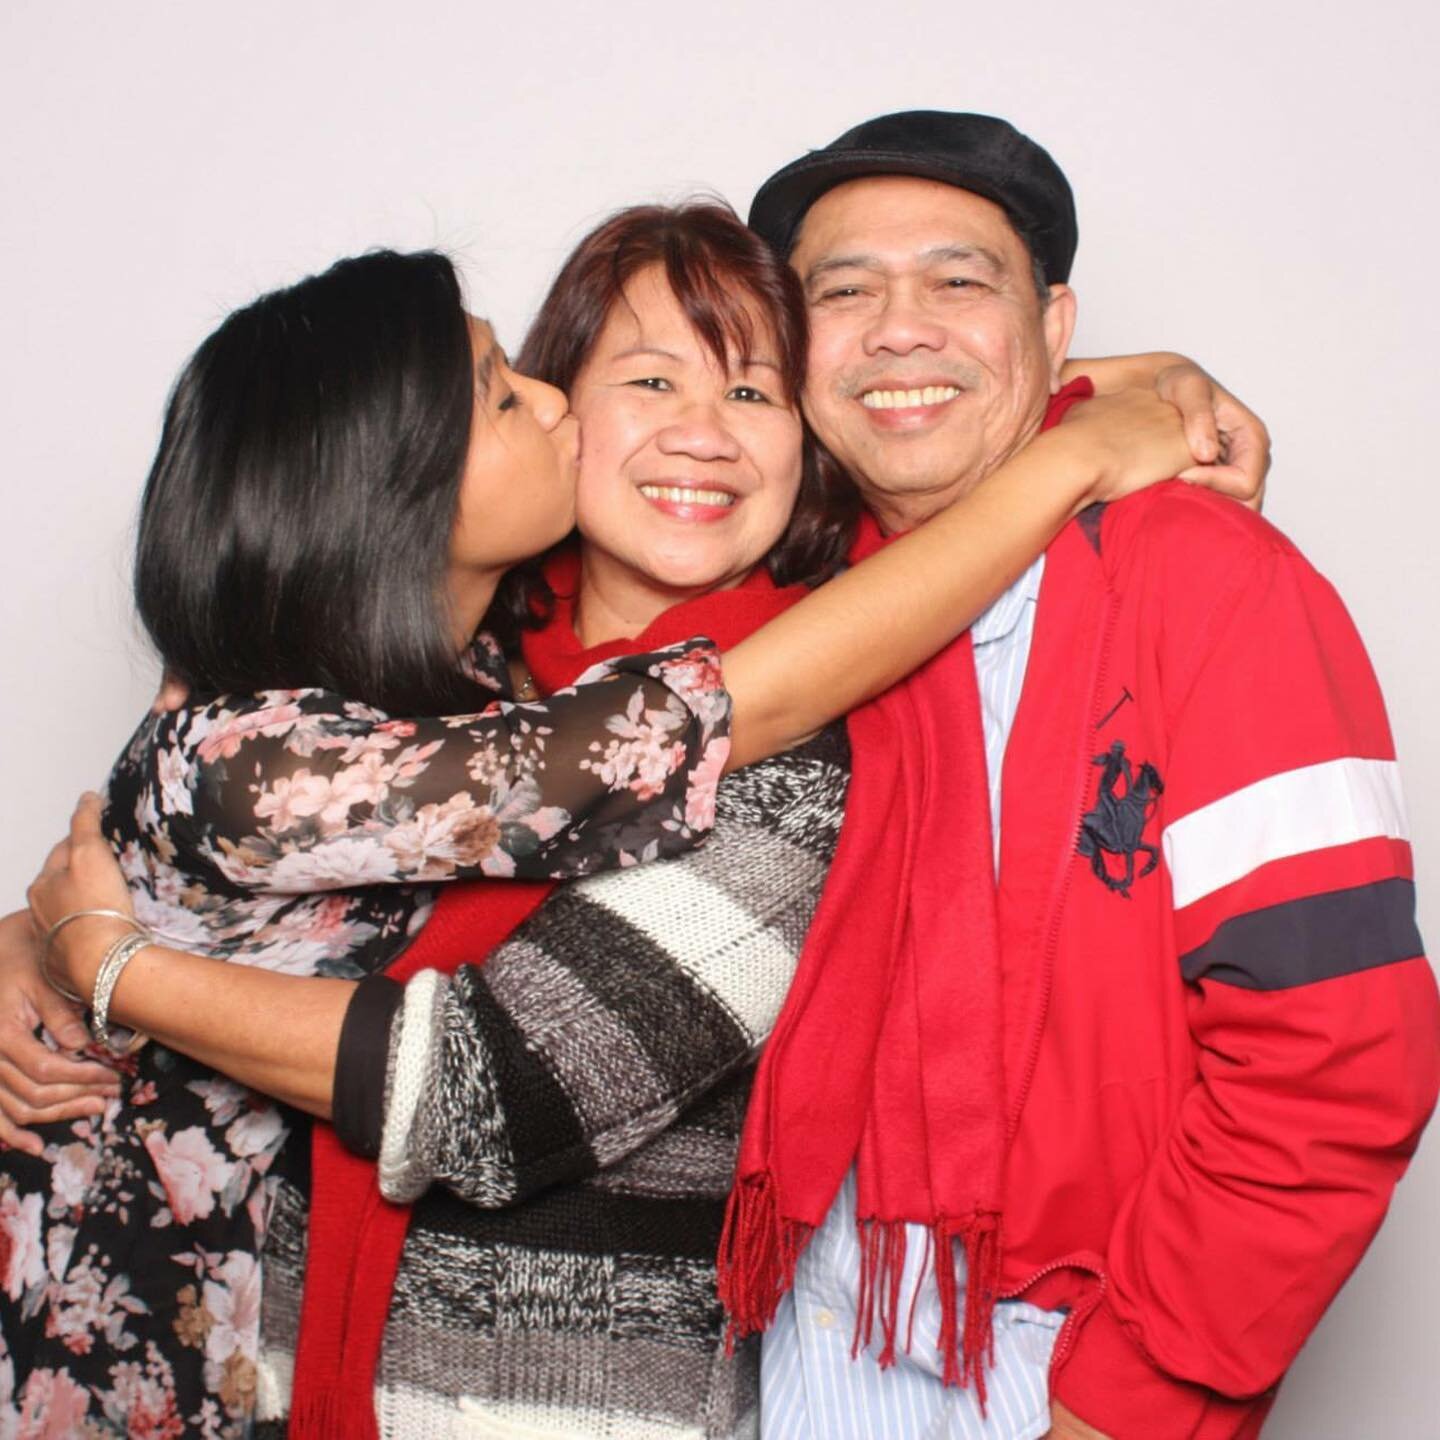 Happy Mother&rsquo;s Day to the most amazing human &hearts;️&hearts;️&hearts;️ Thank you Mom for being the anchor of our family and for showing Kuya and me what it means to be humble, kind, patient and gentle in spirit. You are one of the most hard w